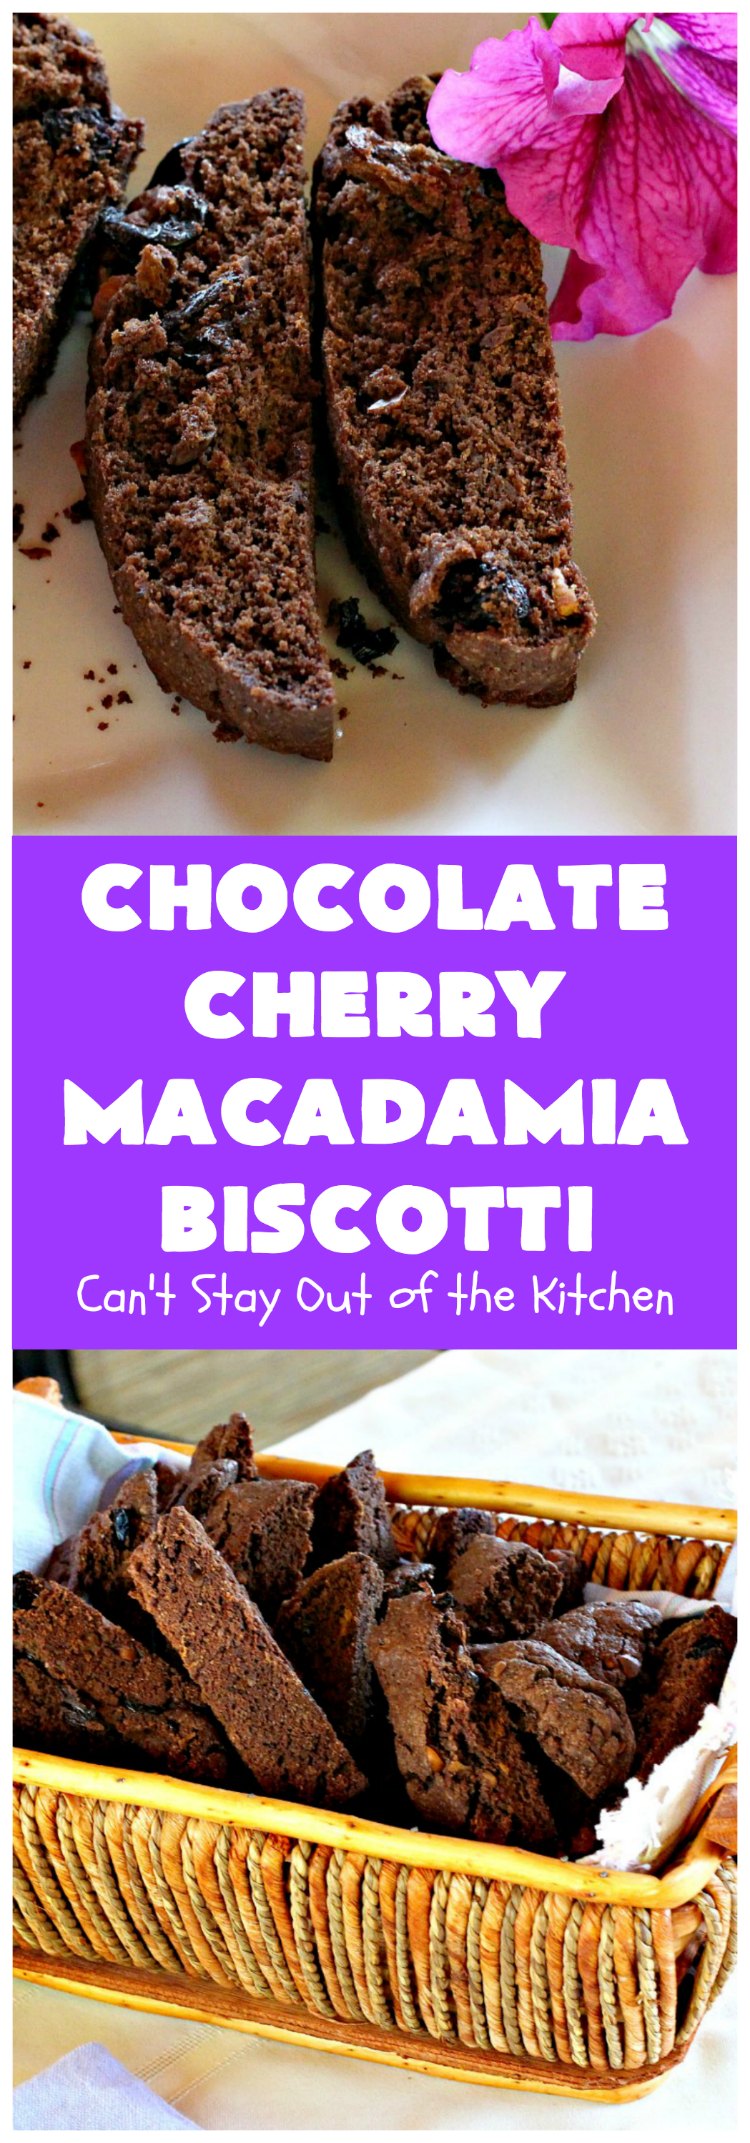 Chocolate Cherry Macadamia Biscotti | Enjoy a cup of coffee or tea with this fantastic #biscotti. It's made with dried #cherries, toasted #MacadamiaNuts & #chocolate! Excellent #breakfast idea for company or #holidays. #ChocolateCherryMacadamiaBiscotti